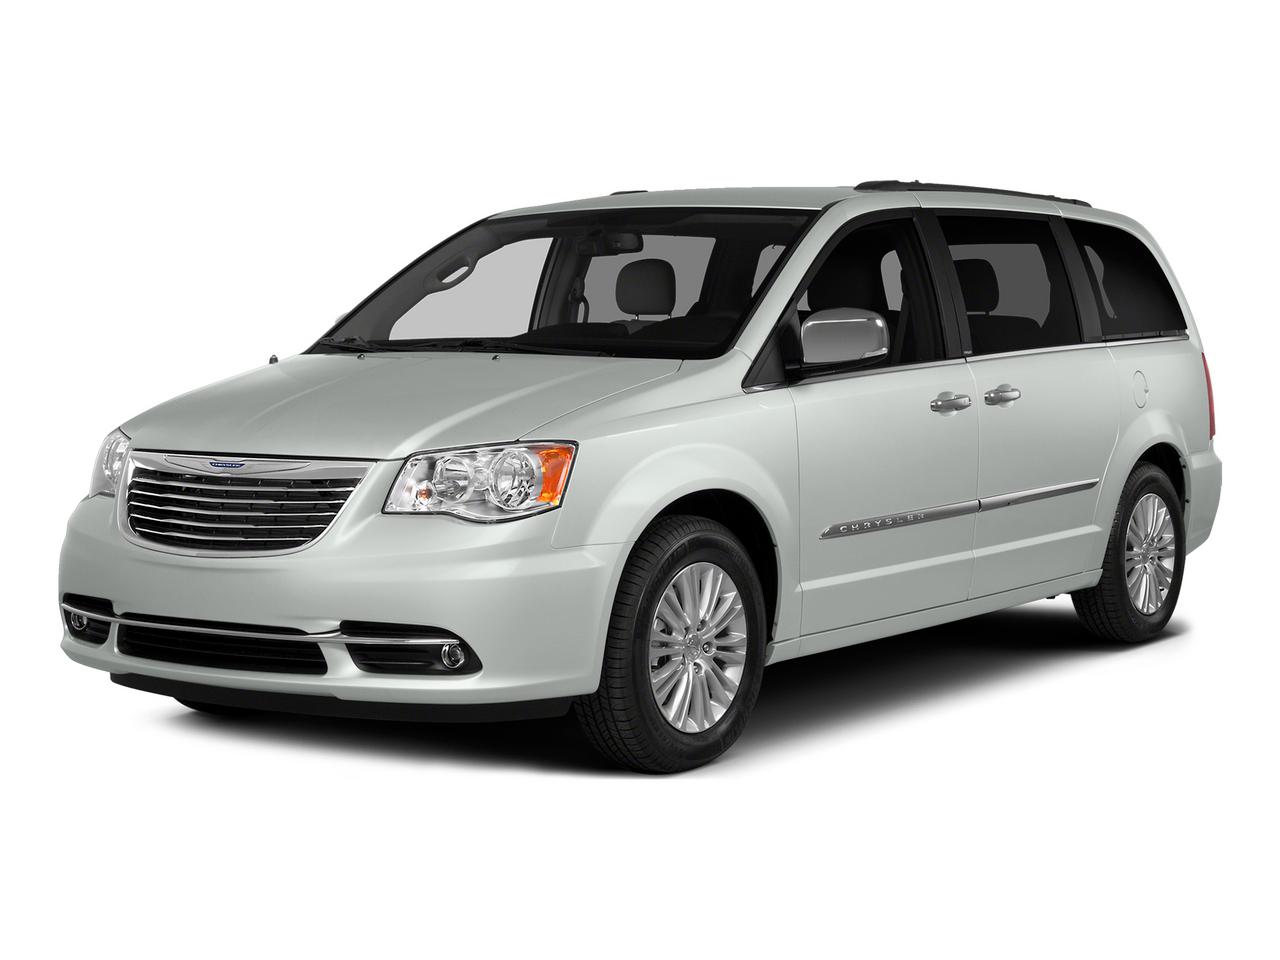 2015 Chrysler Town & Country Vehicle Photo in Peoria, IL 61615